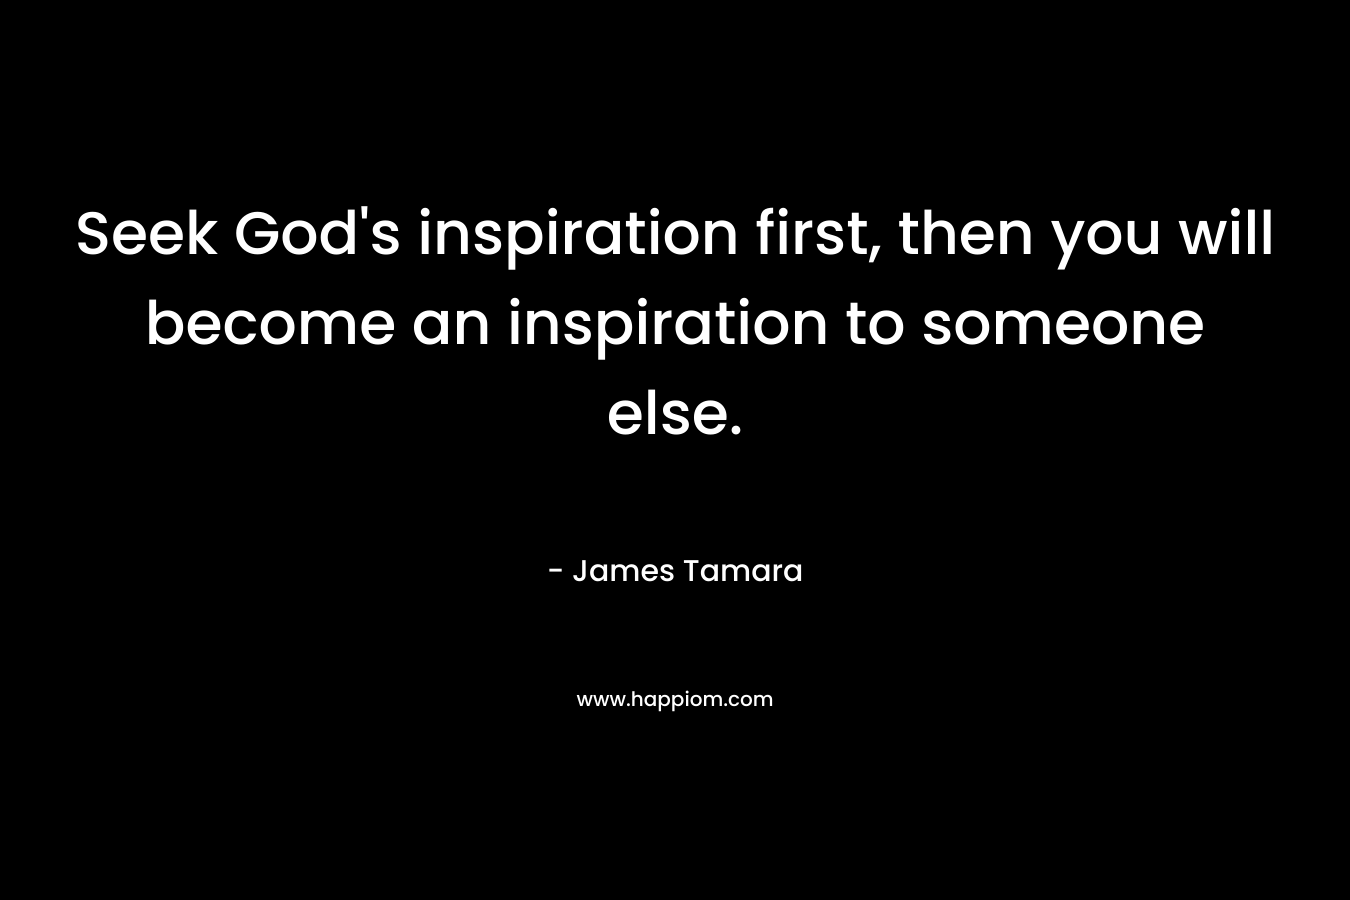 Seek God's inspiration first, then you will become an inspiration to someone else.